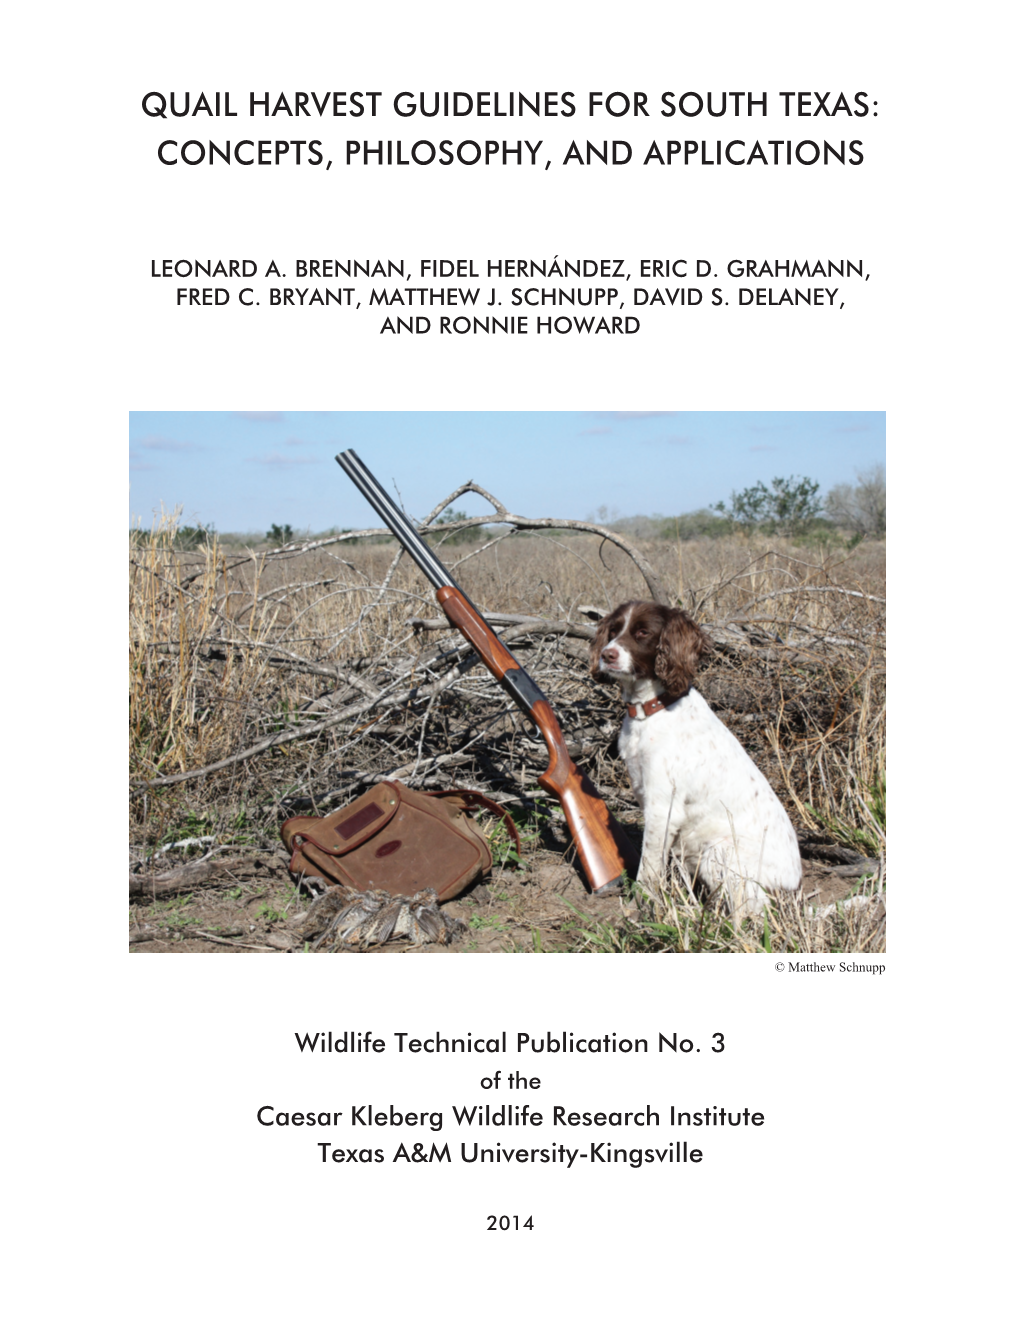 Quail Harvest Guidelines for South Texas: Concepts, Philosophy, and Applications